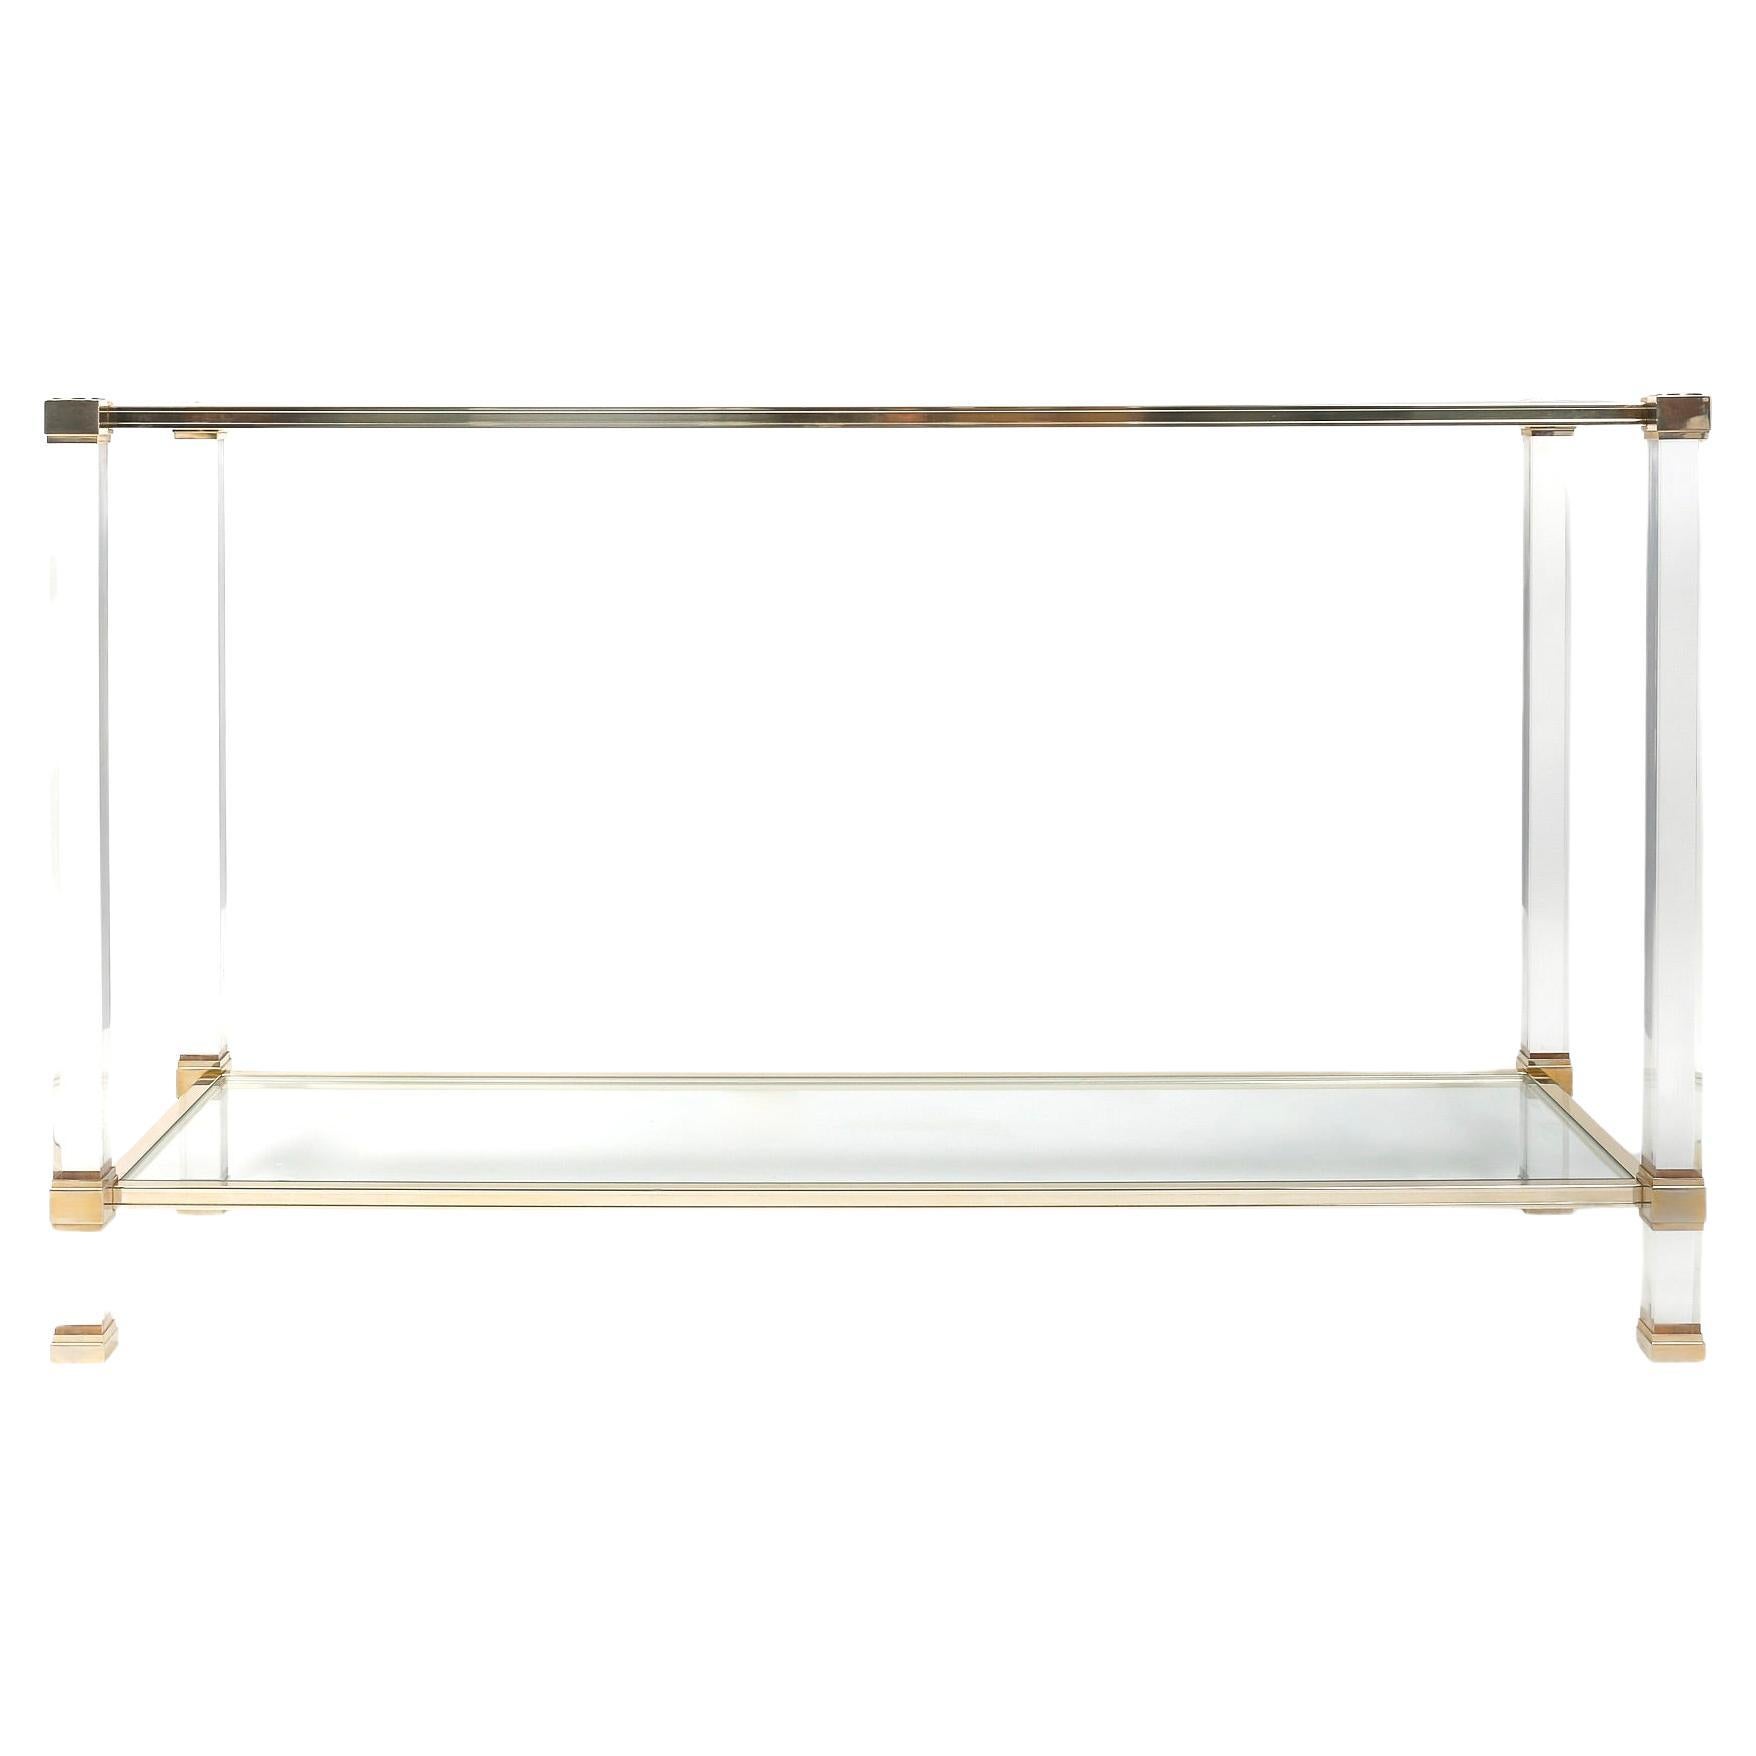 Rectangular console table in Lucite and 22-carat gold-plated aluminum, by Pierre Vandel, in the mid-century French modern style.
Rectangular in shape, it rests on 4 square Lucite legs on which rest two gold-plated aluminum frames positioned at the